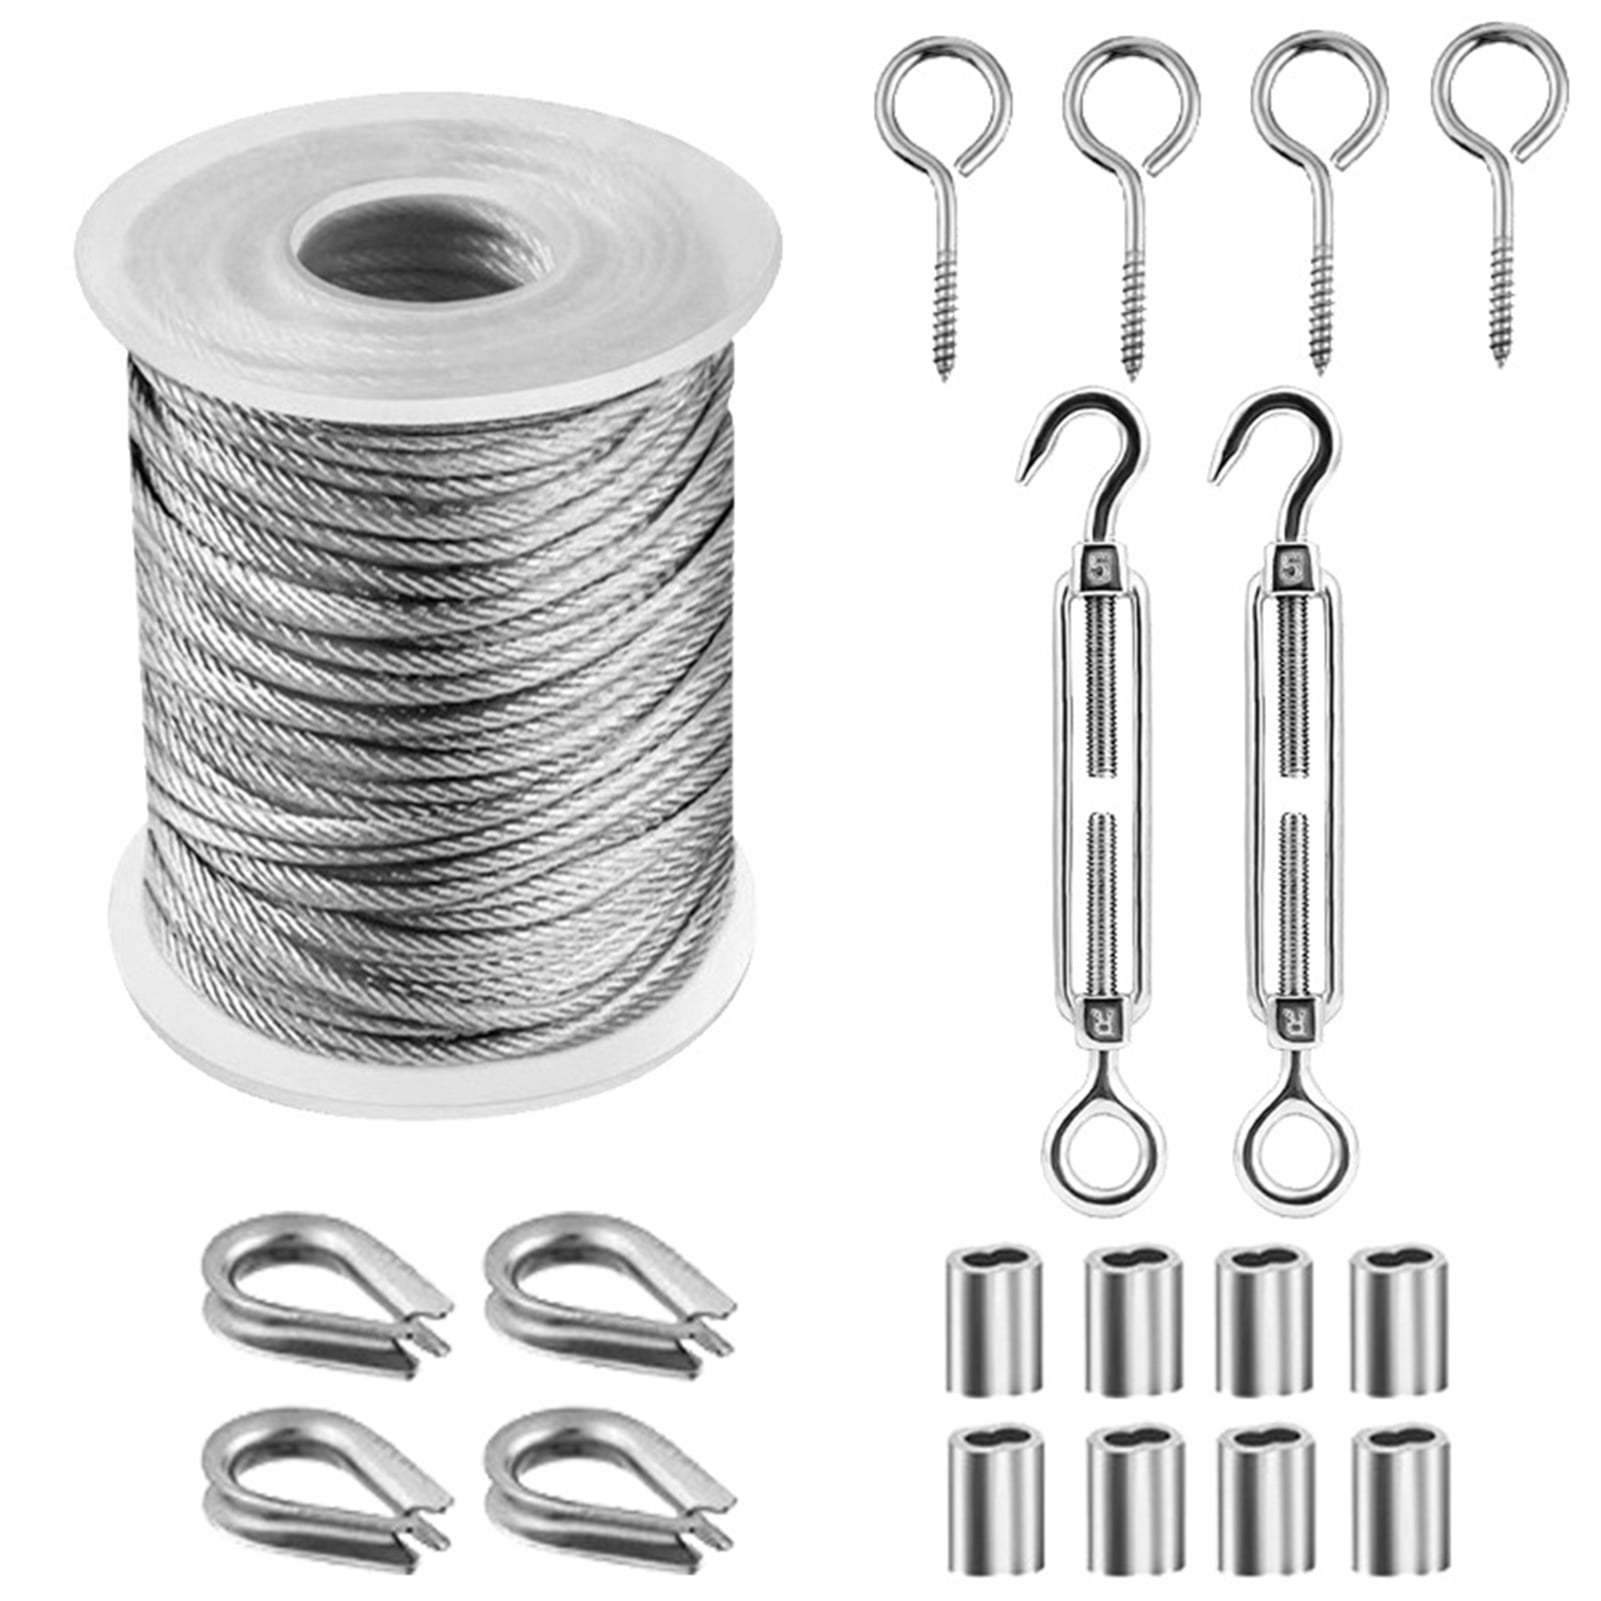 MOVKZACV Stainless Steel String Light Hanging Kit Outdoor Lights Suspension Kit with 25m/82FT Wire Rope Cable for Garden Patio Pavilion Deck Outdoor